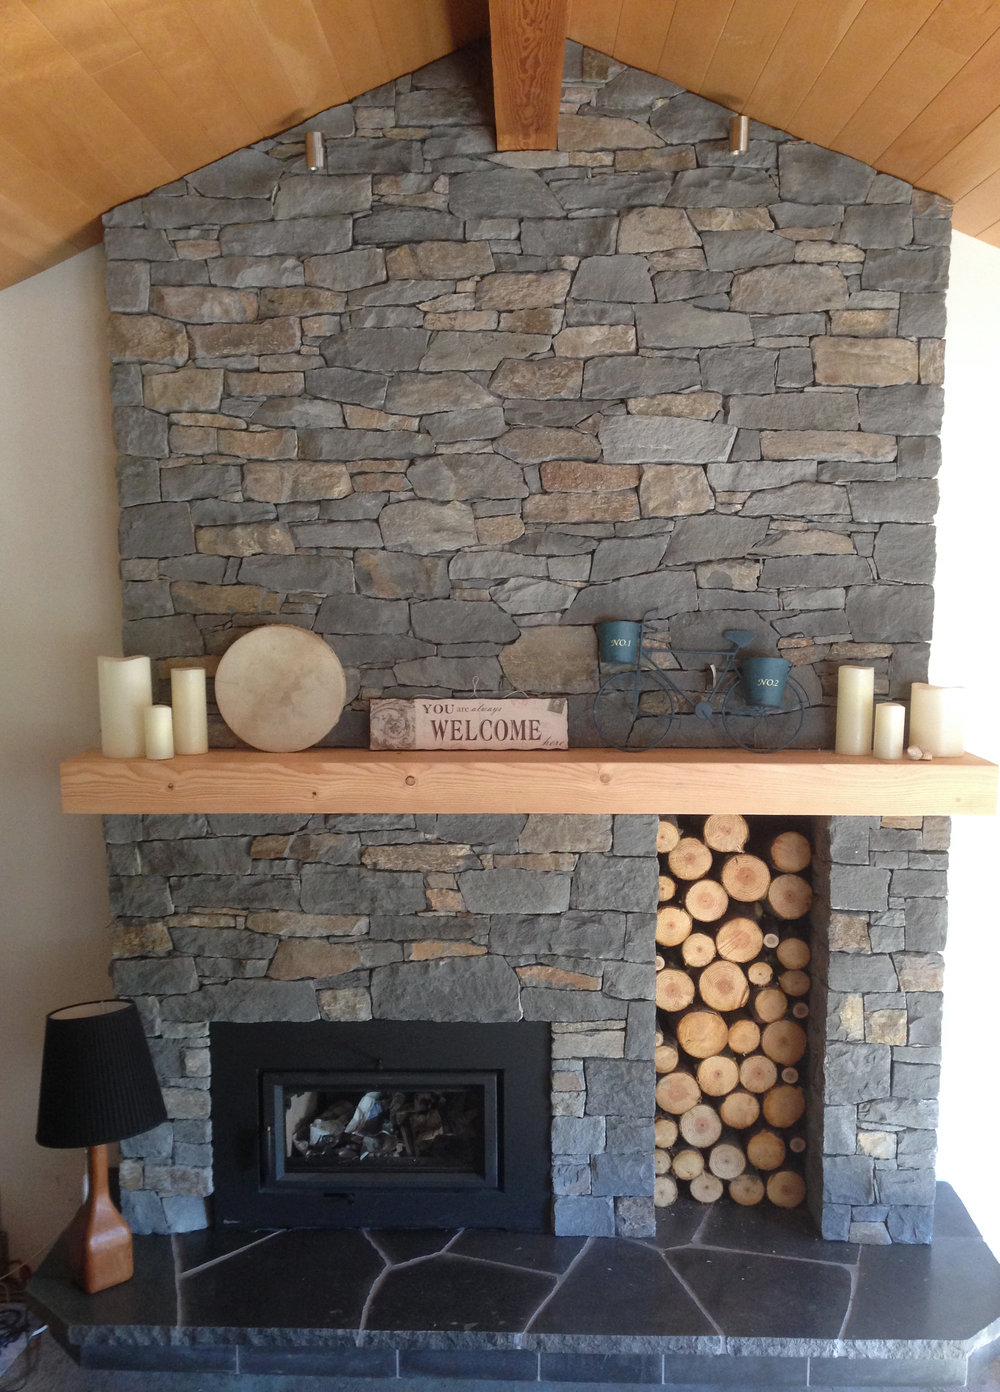 Where to Buy Fireplace Hearth Stone Luxury Custom Fireplaces Hearths Stone and Wood Mantels